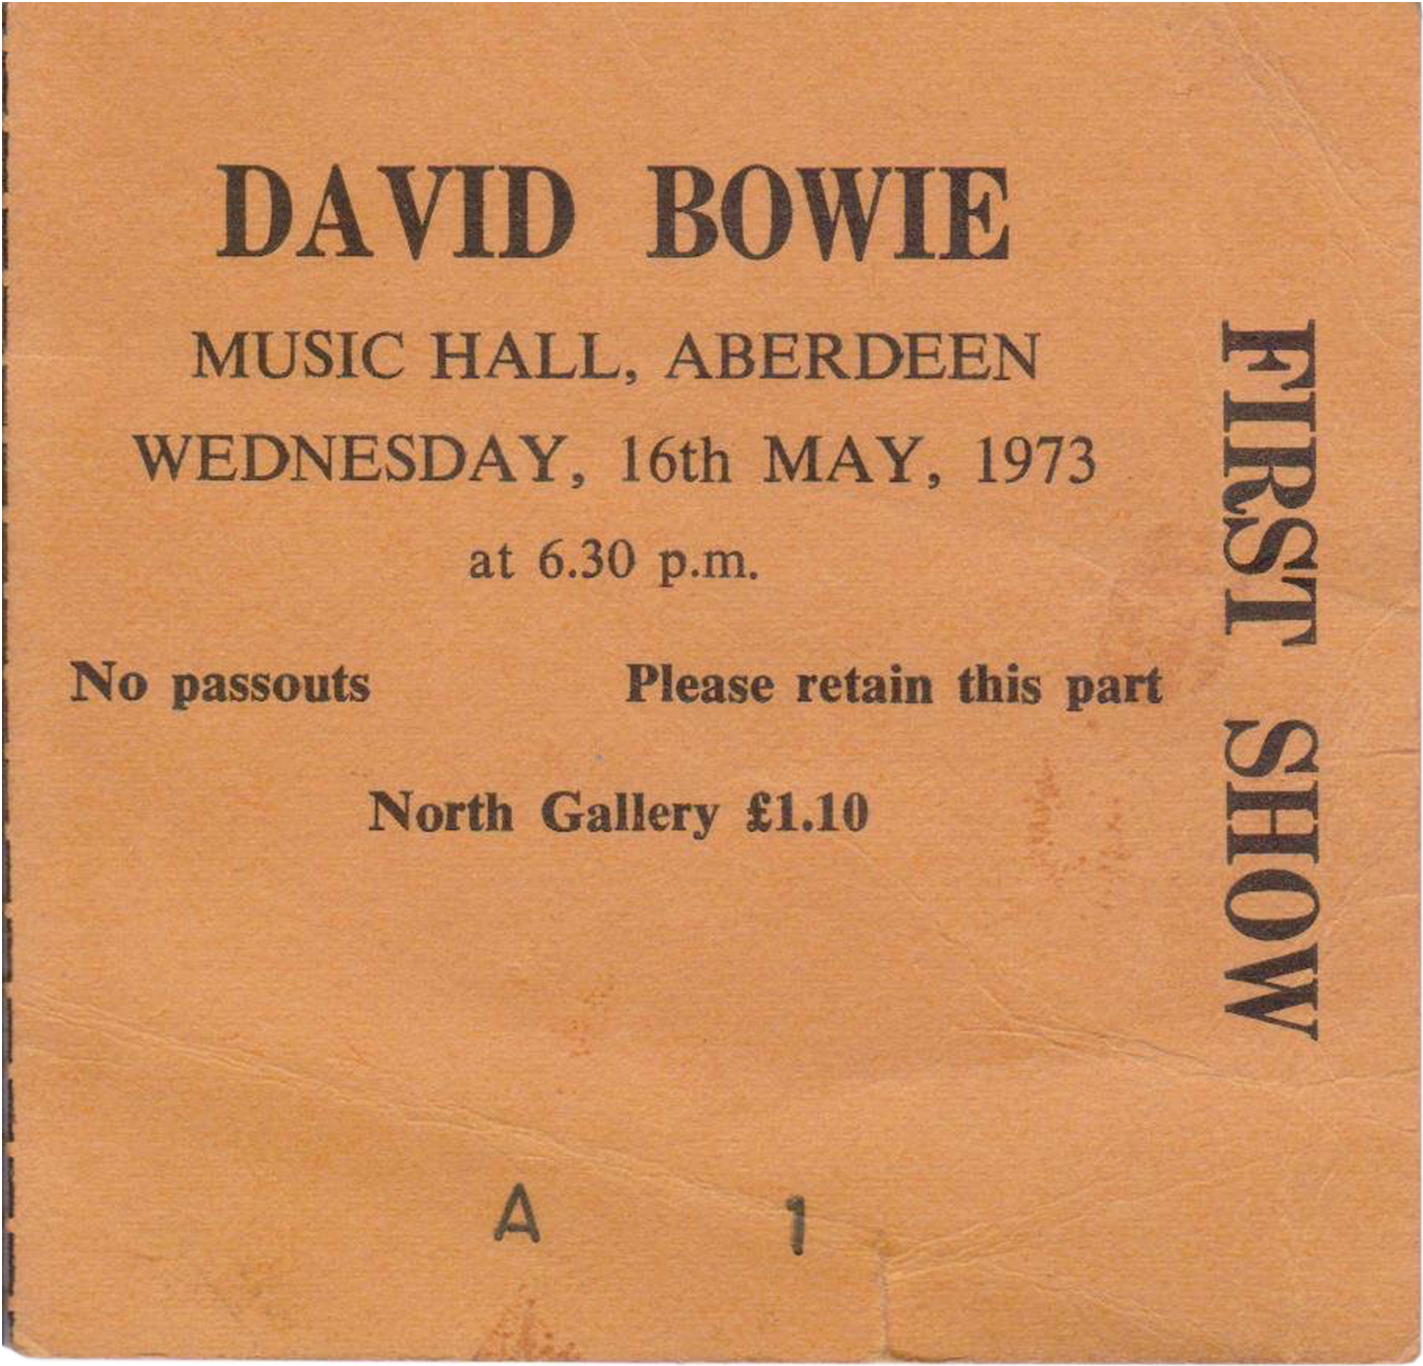 Ticket for 1973 David Bowie gig at Aberdeen Music Hall.